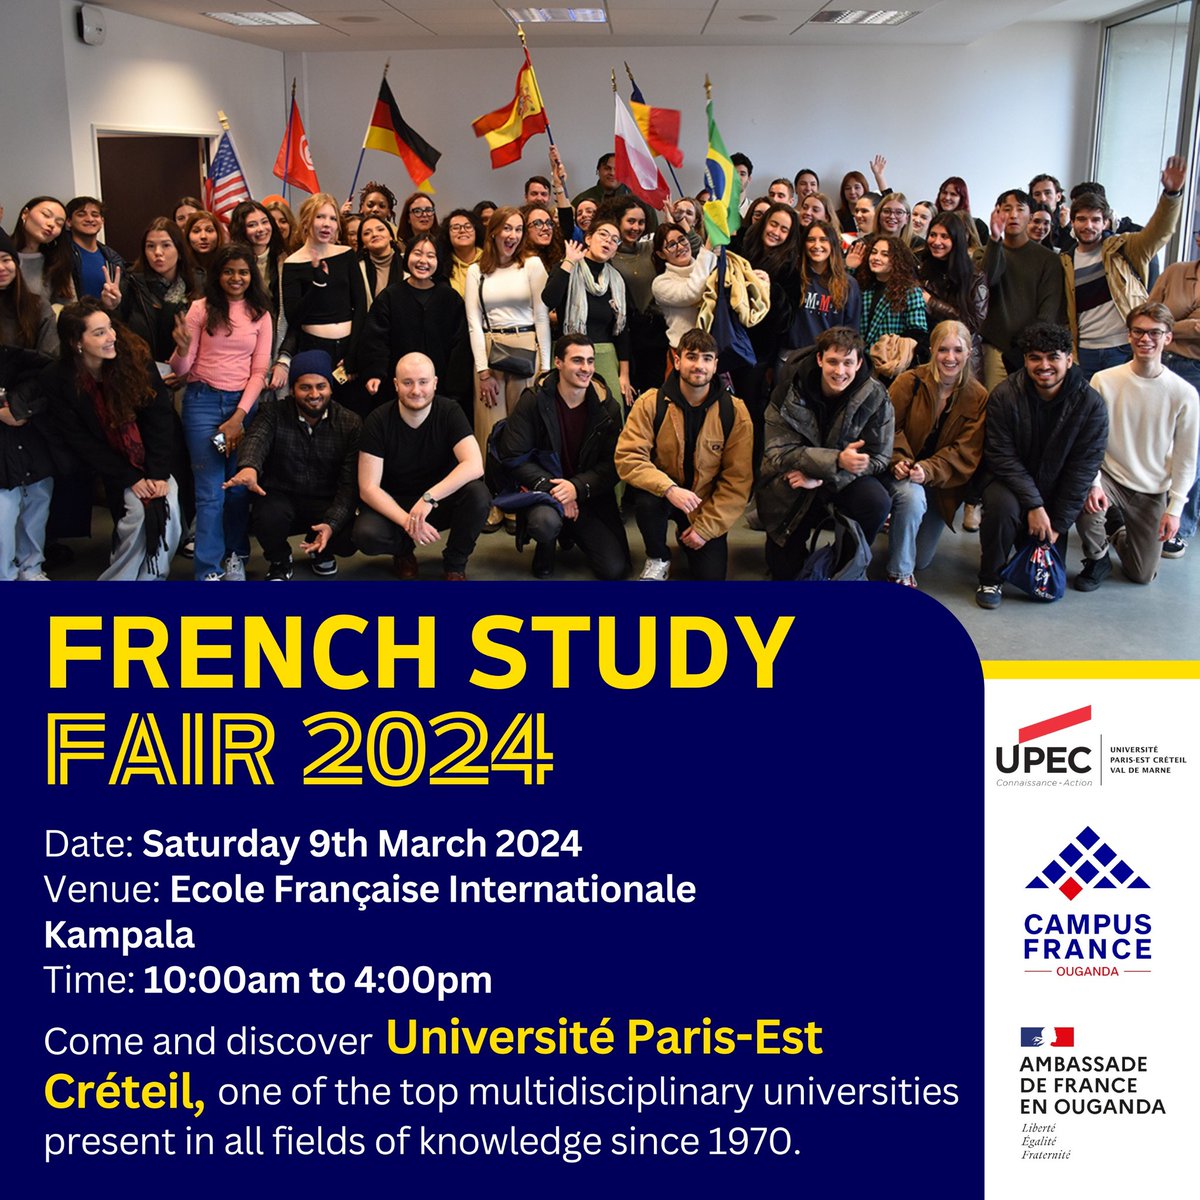 For all programs in different disciplines, we have #ParisestCreteil with us at The École française, up to 4:00pm. Do not let this opportunity pass you by. See you :) #RendezvousenFrance 🇫🇷